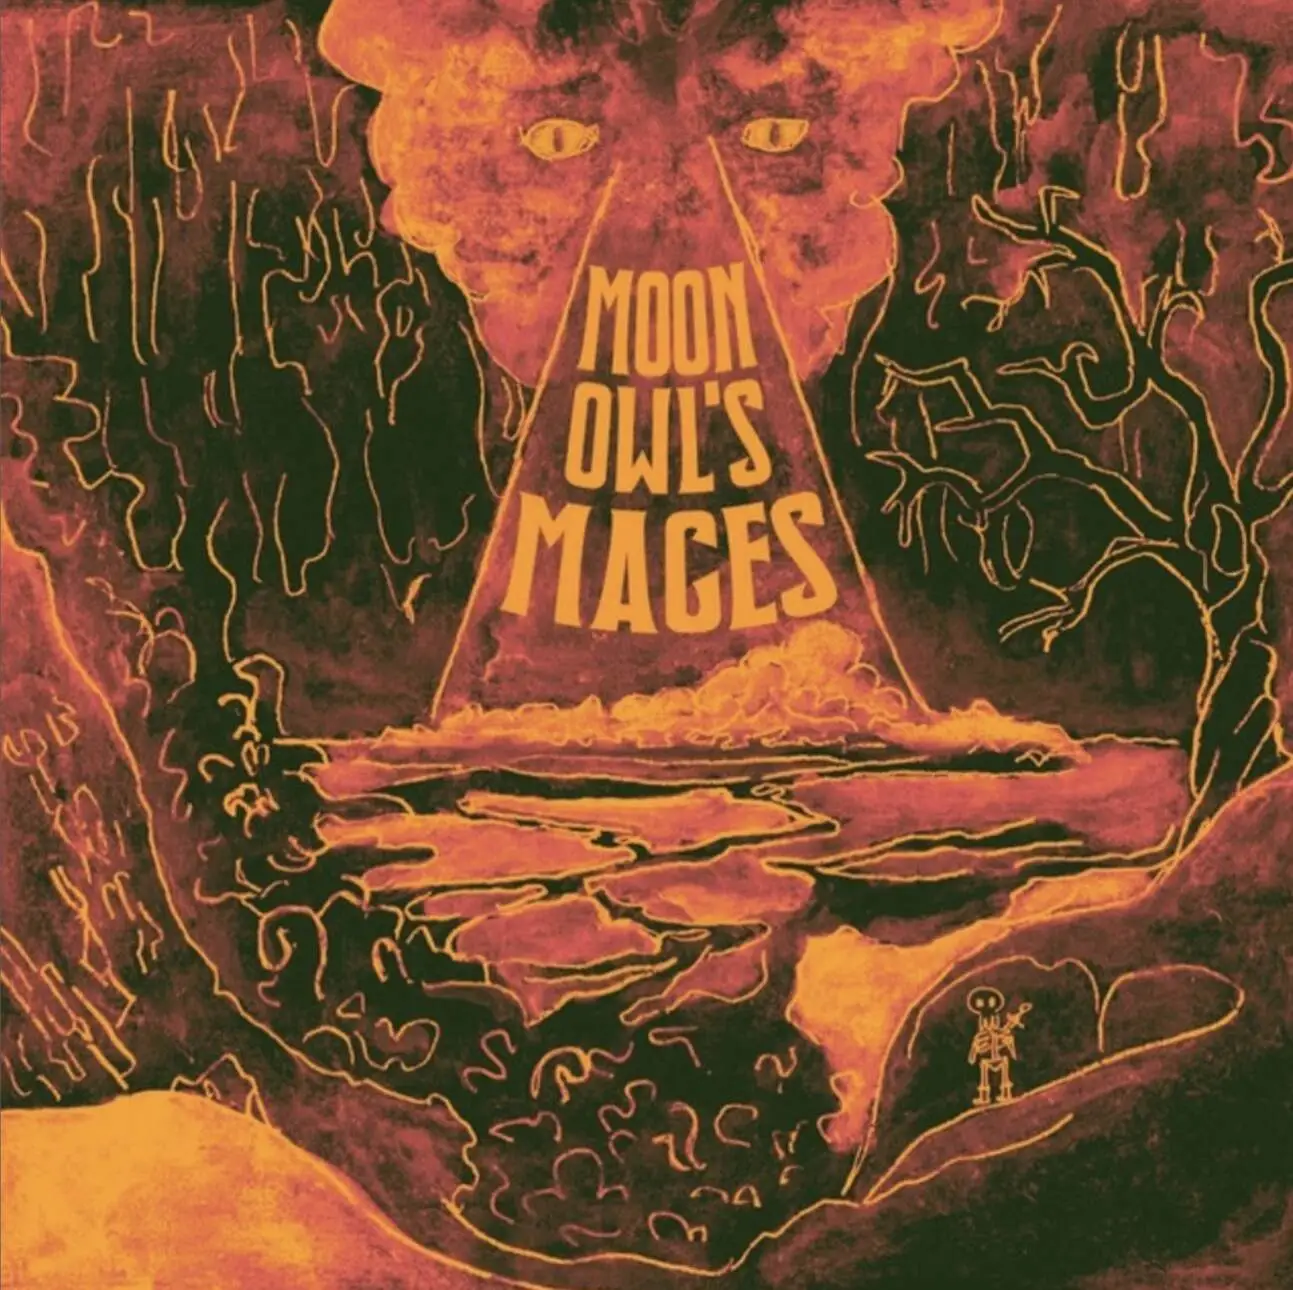 skelly bones and the flaming crown by moon owls mages album cover